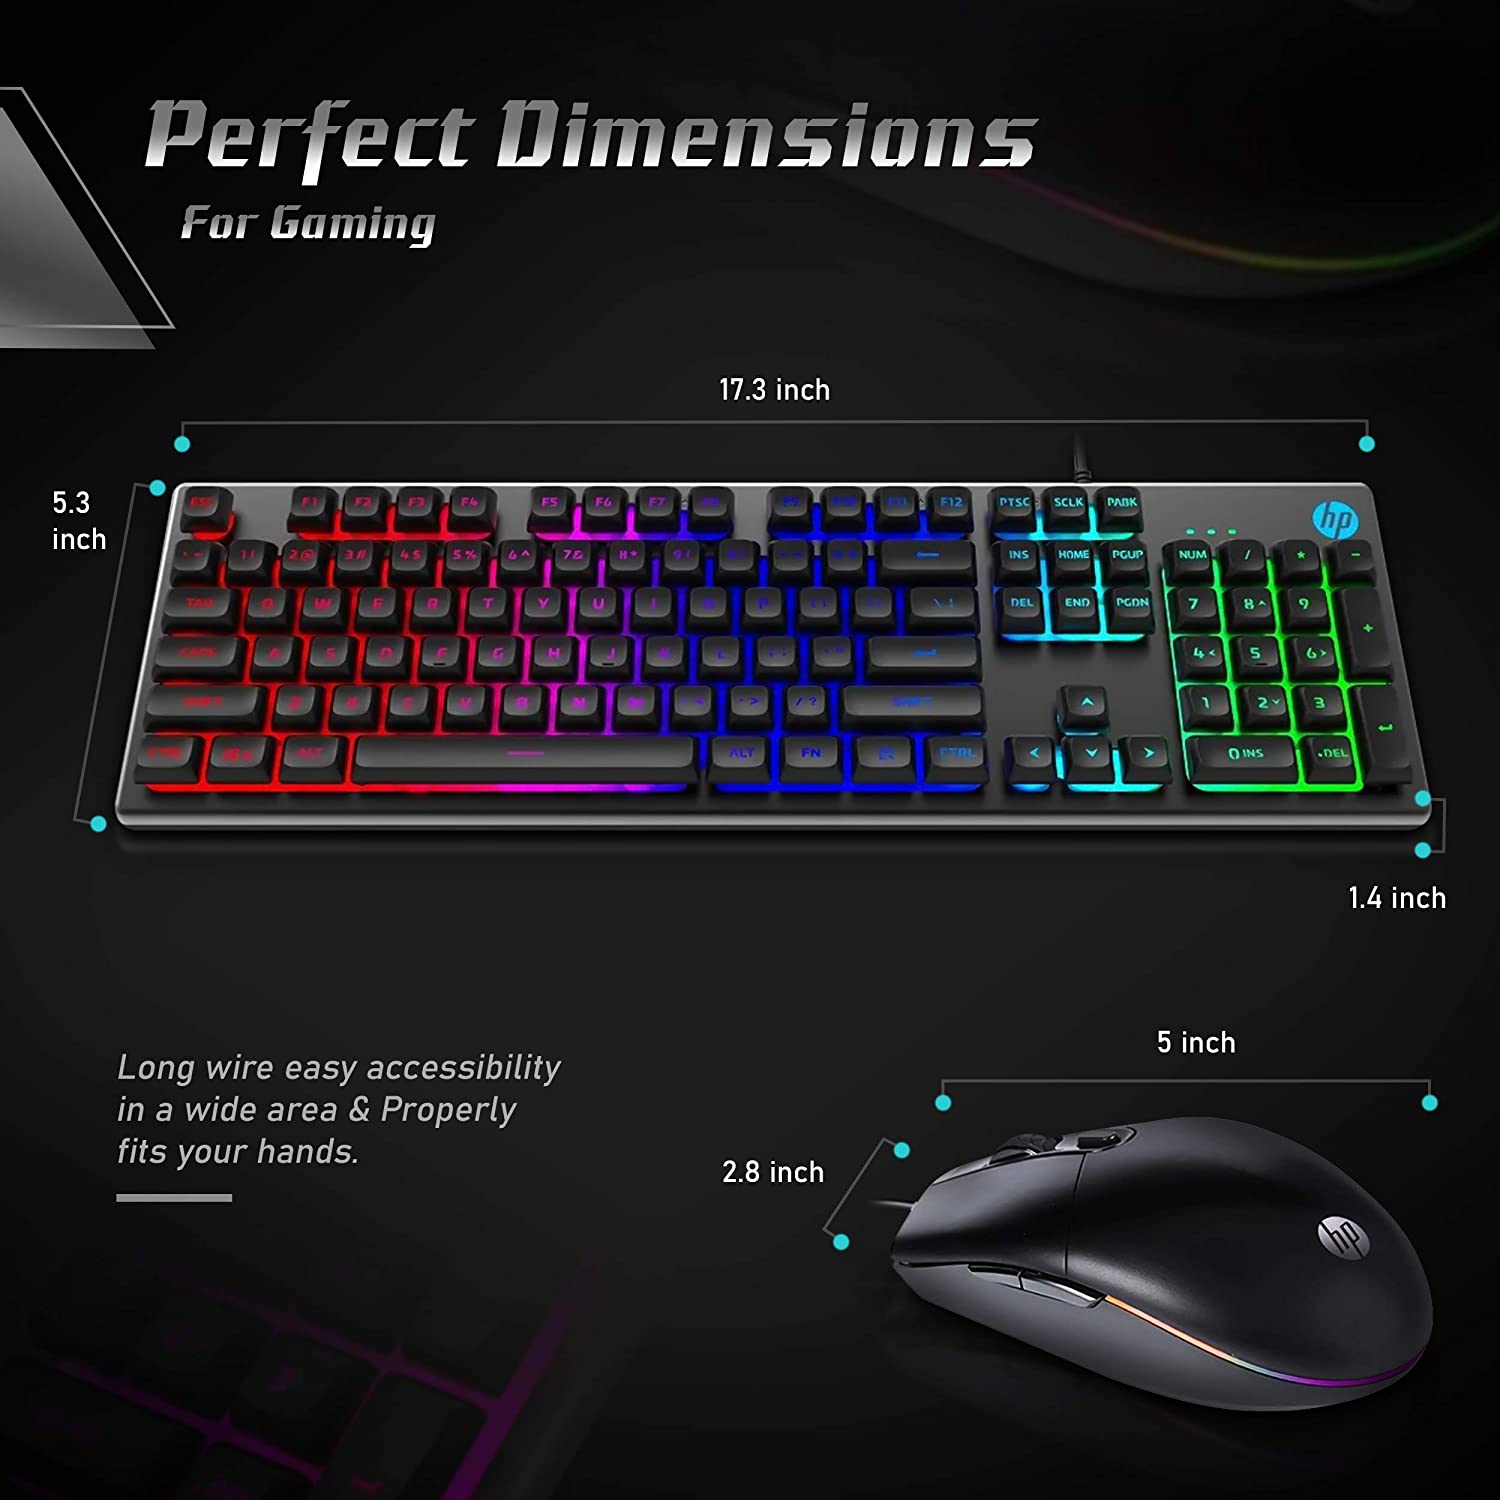 HP Gaming Keyboard and Mouse Combo - HPKM300F, Wired RGB Backlit Keyboard and Mouse, Rust & Scratch Proof Metal Penal - 6 Speed Adjustable DPI with Responsive Keys